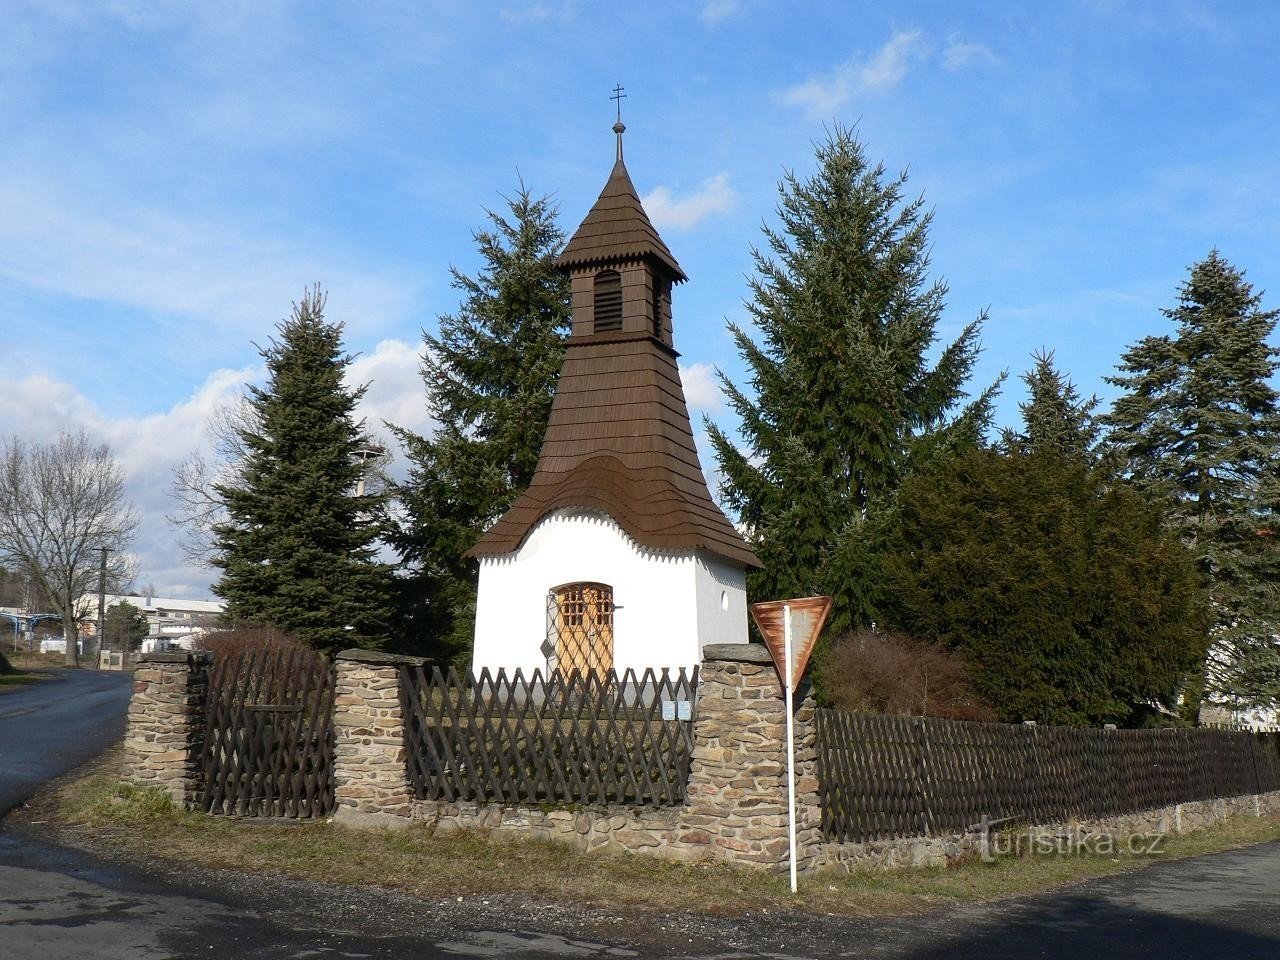 Dražovice, small park with a chapel